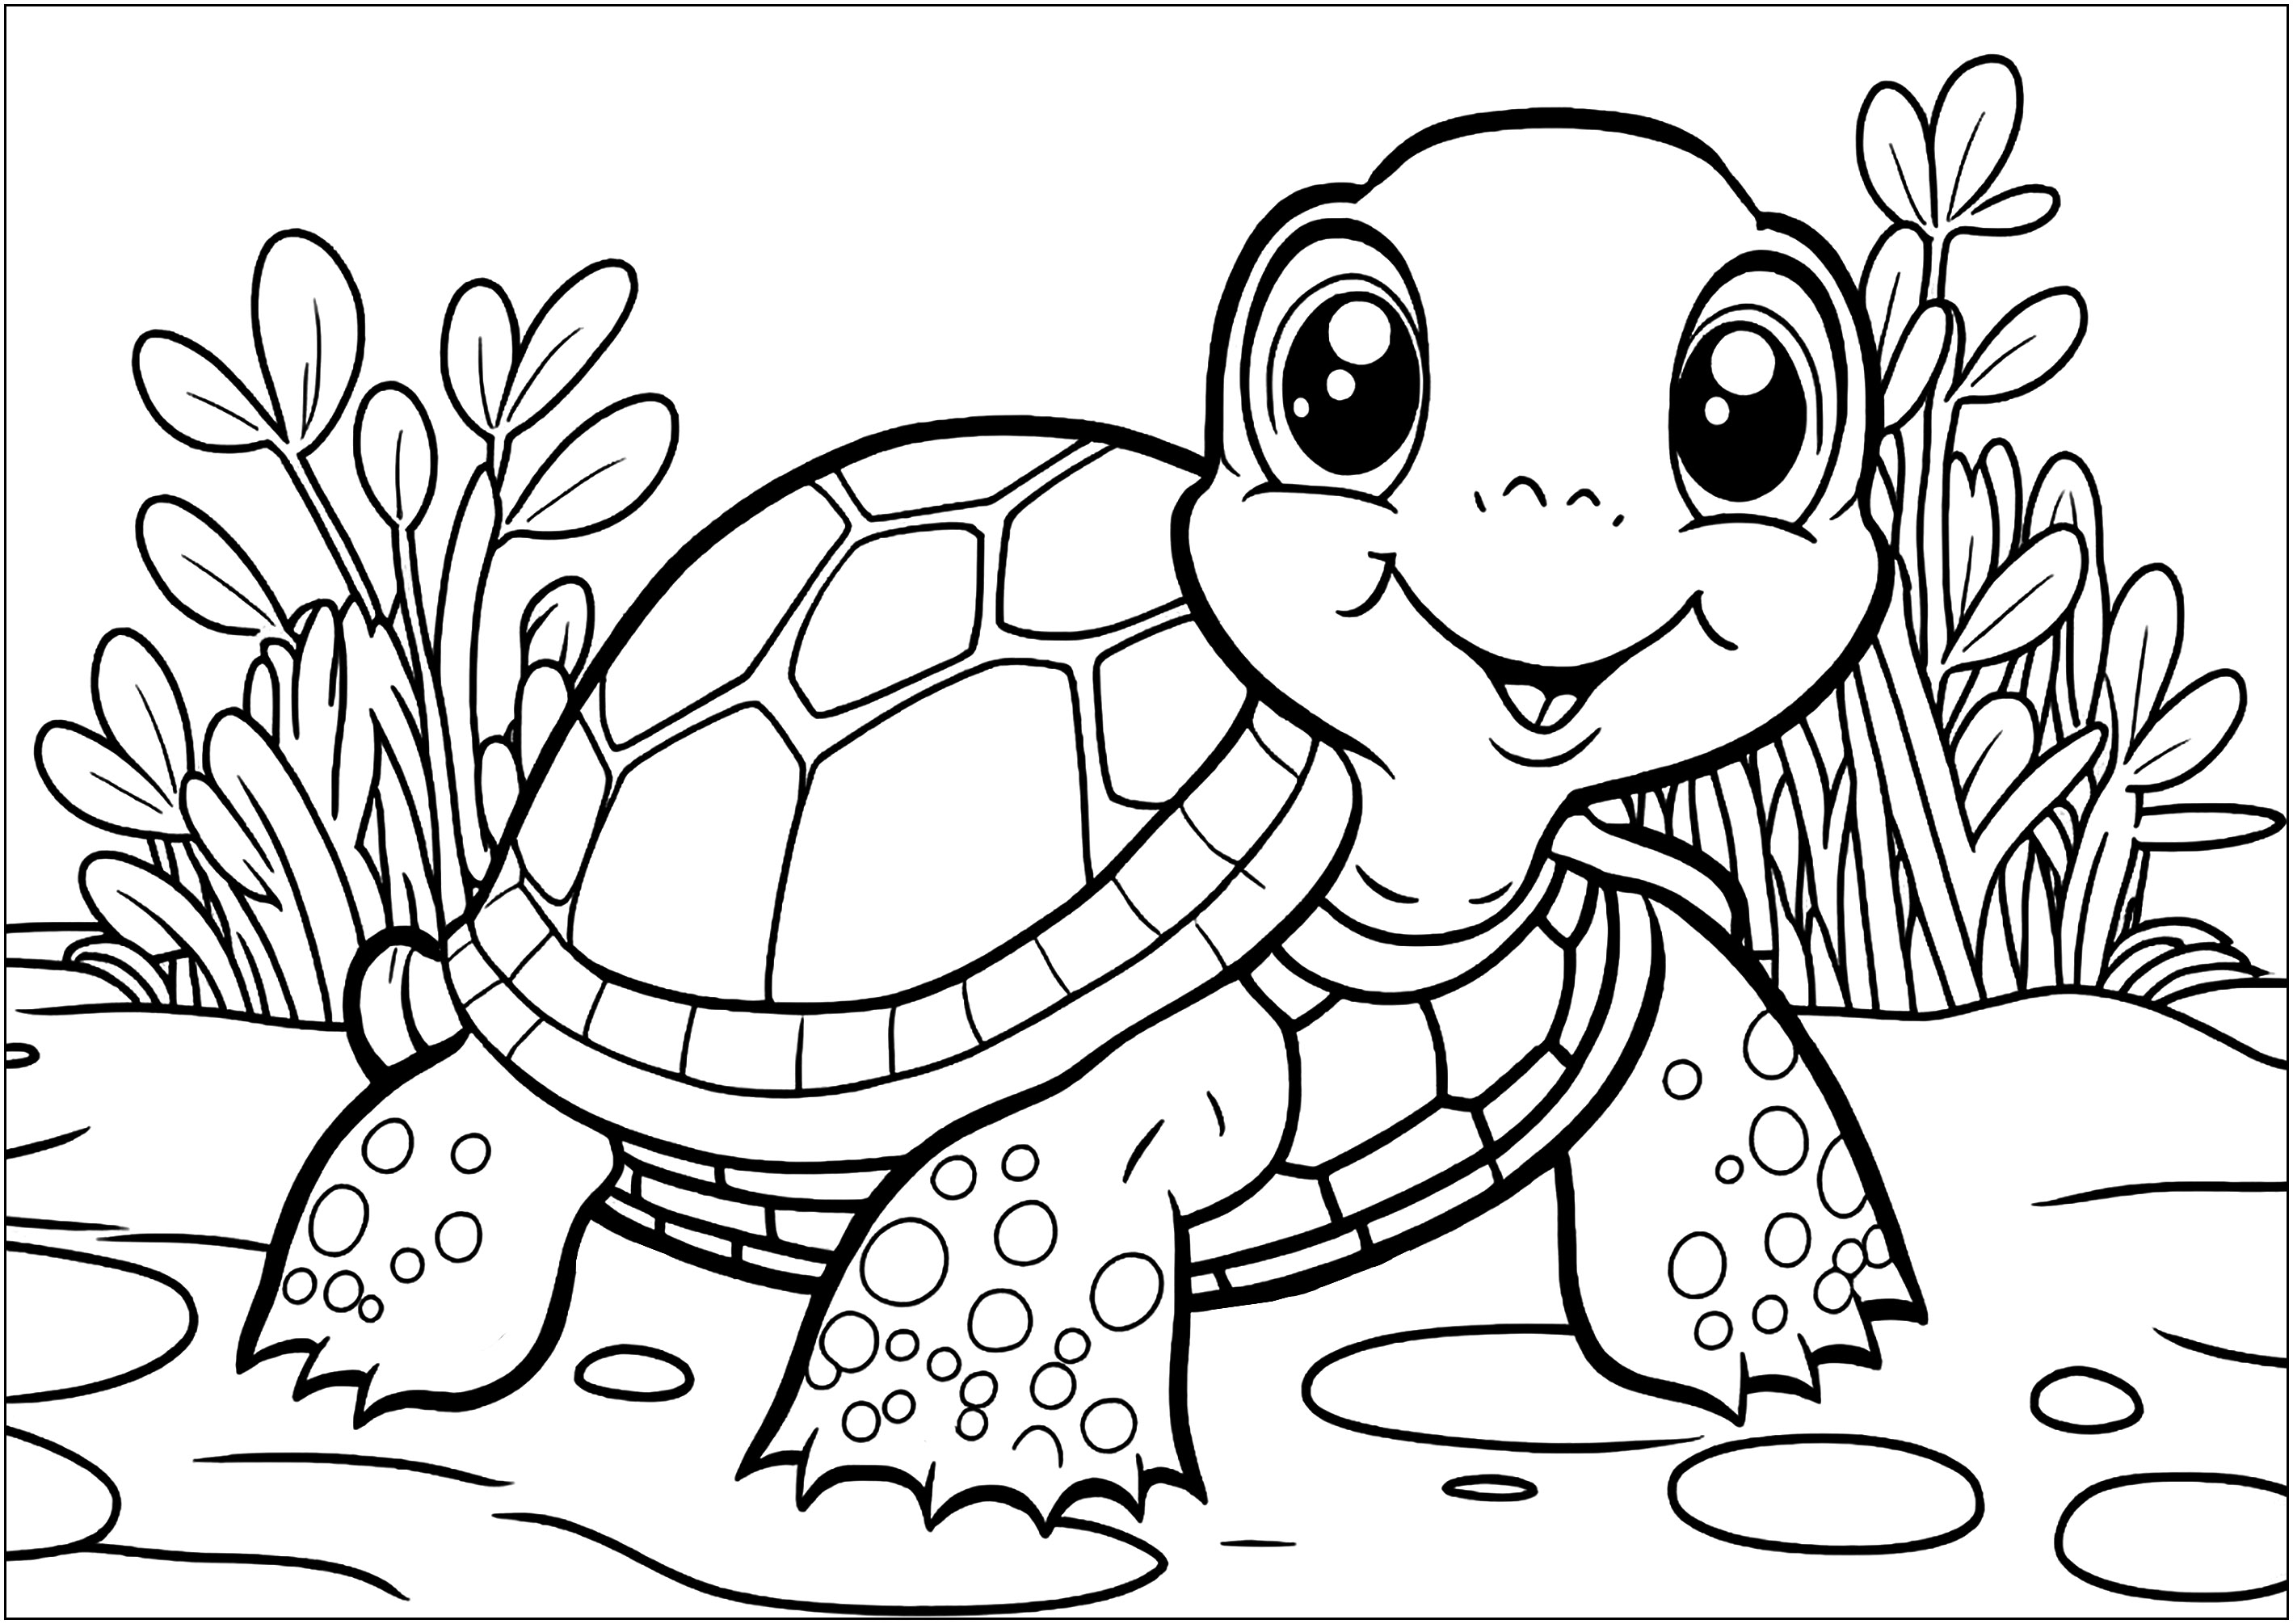 smiling-turtle-turtles-kids-coloring-pages